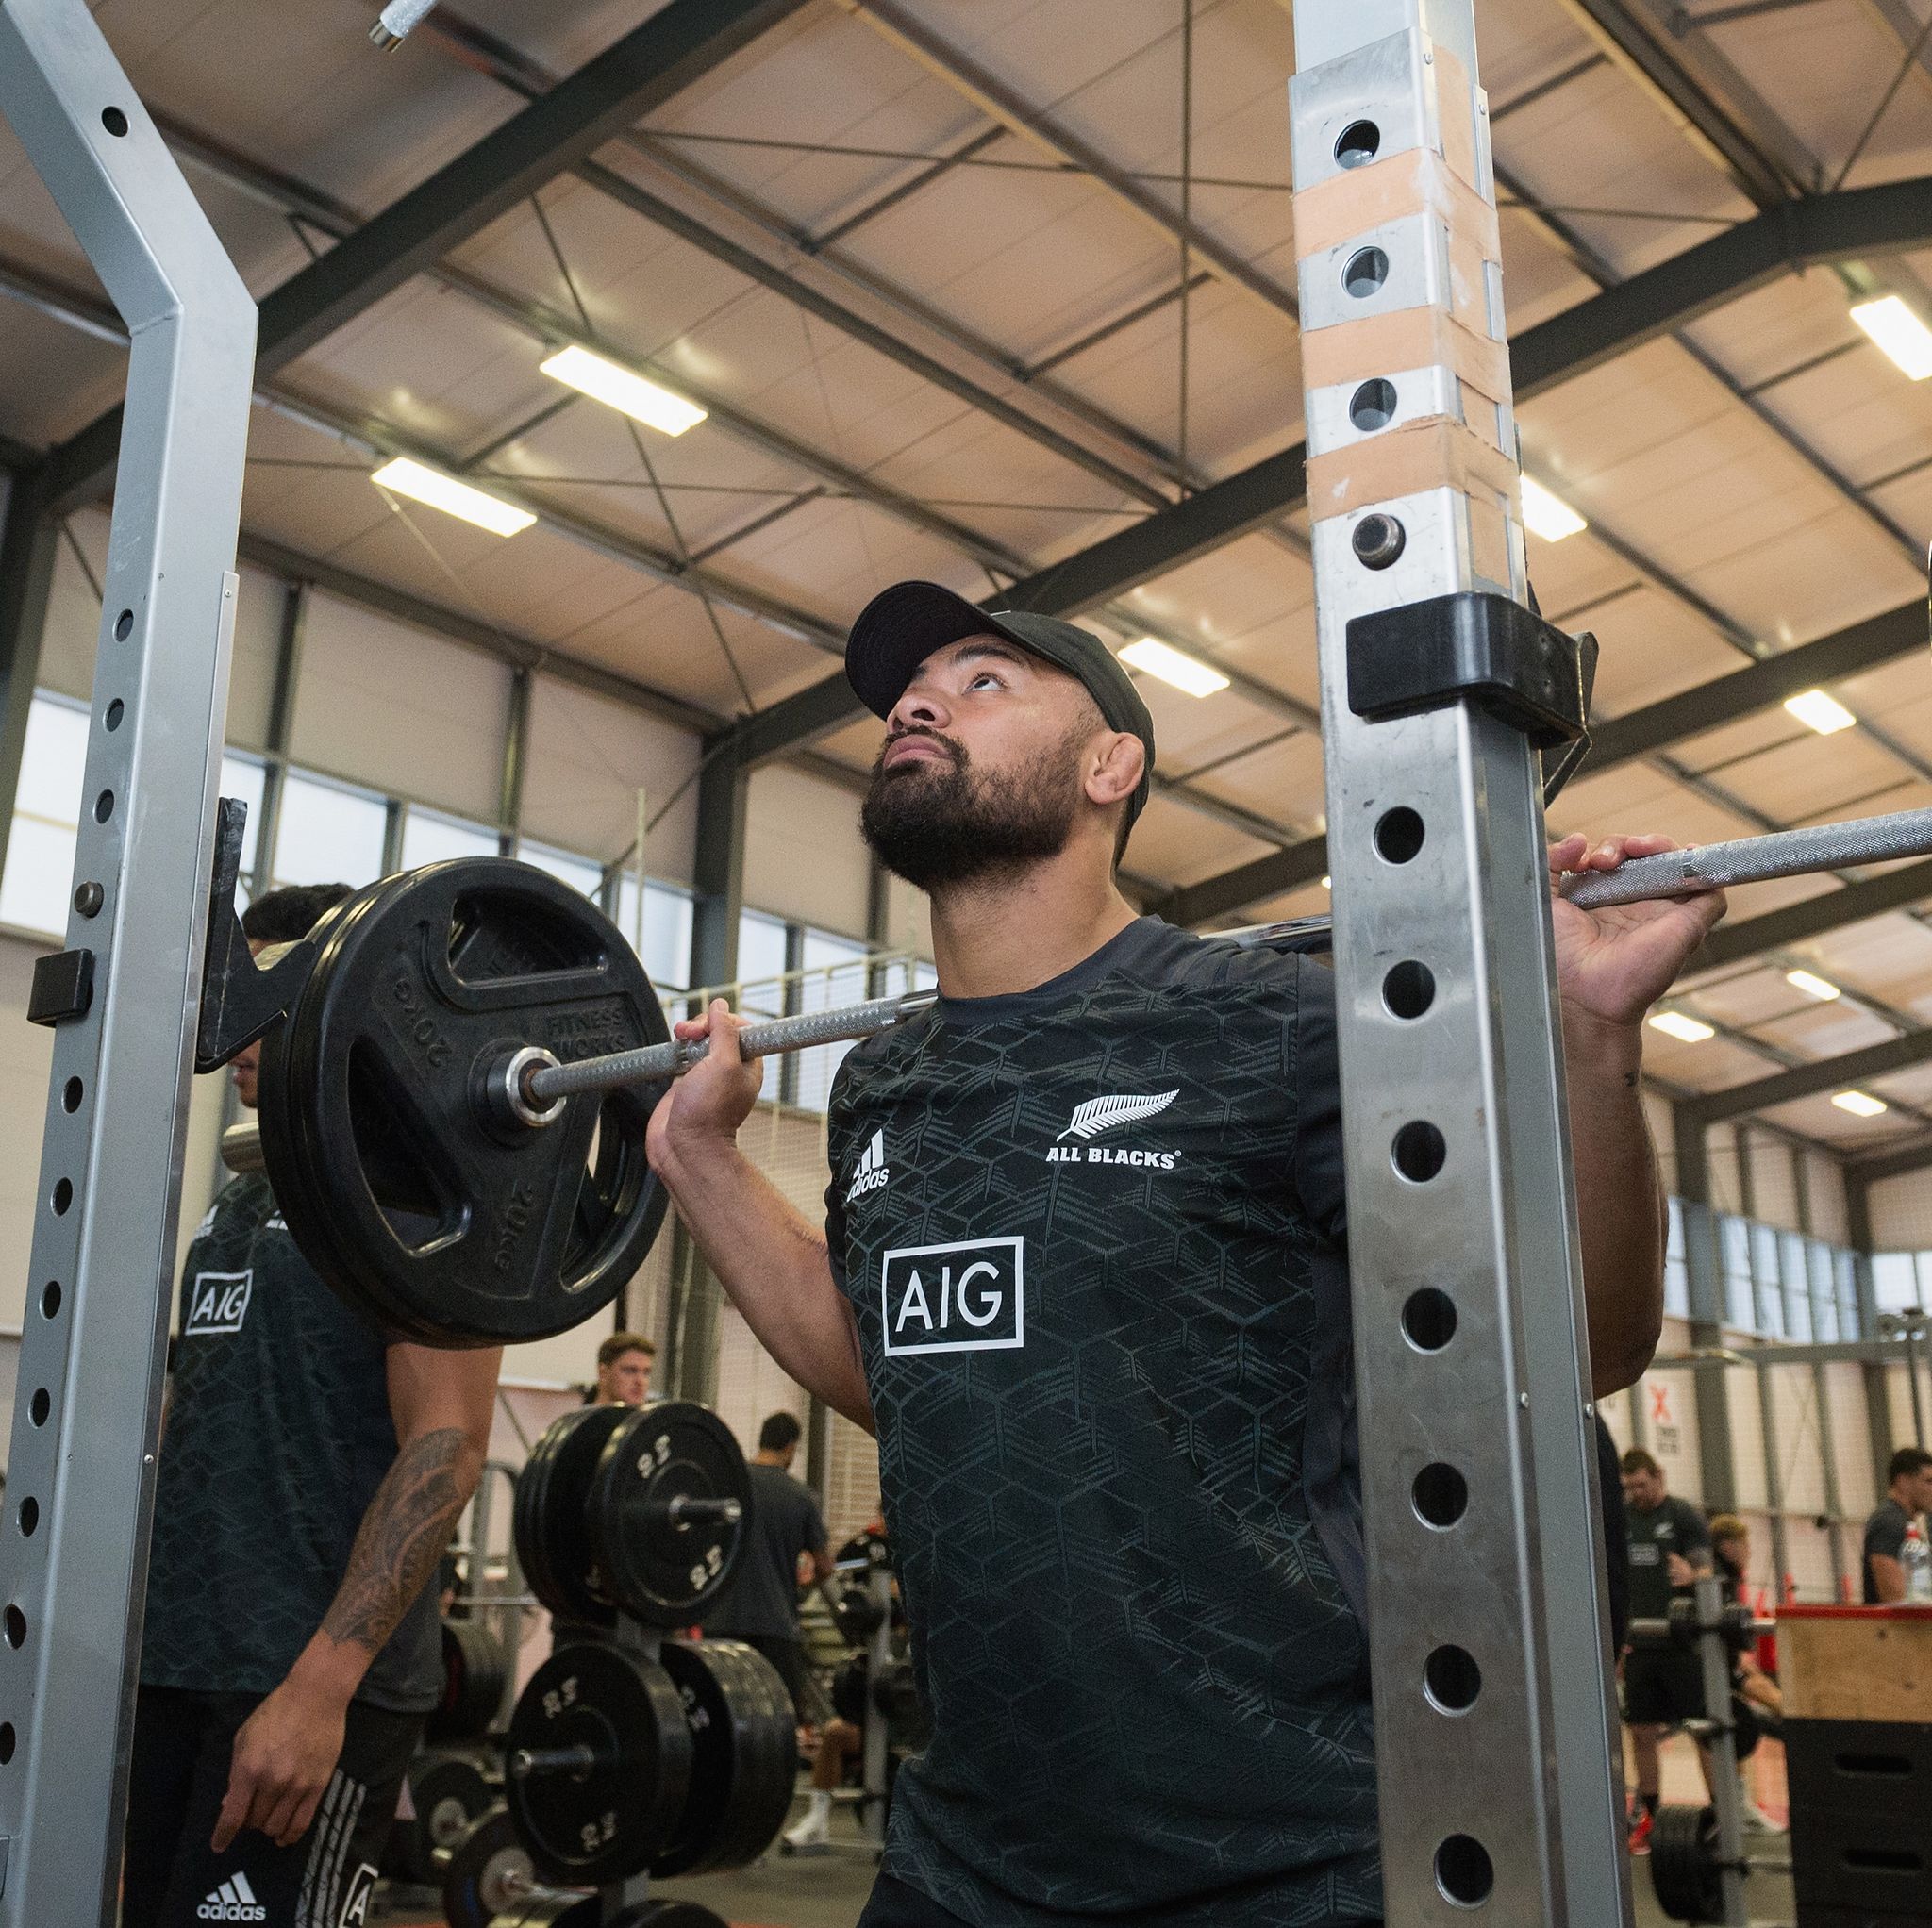 Sale Sharks build 'mental gym' to improve players' breathing